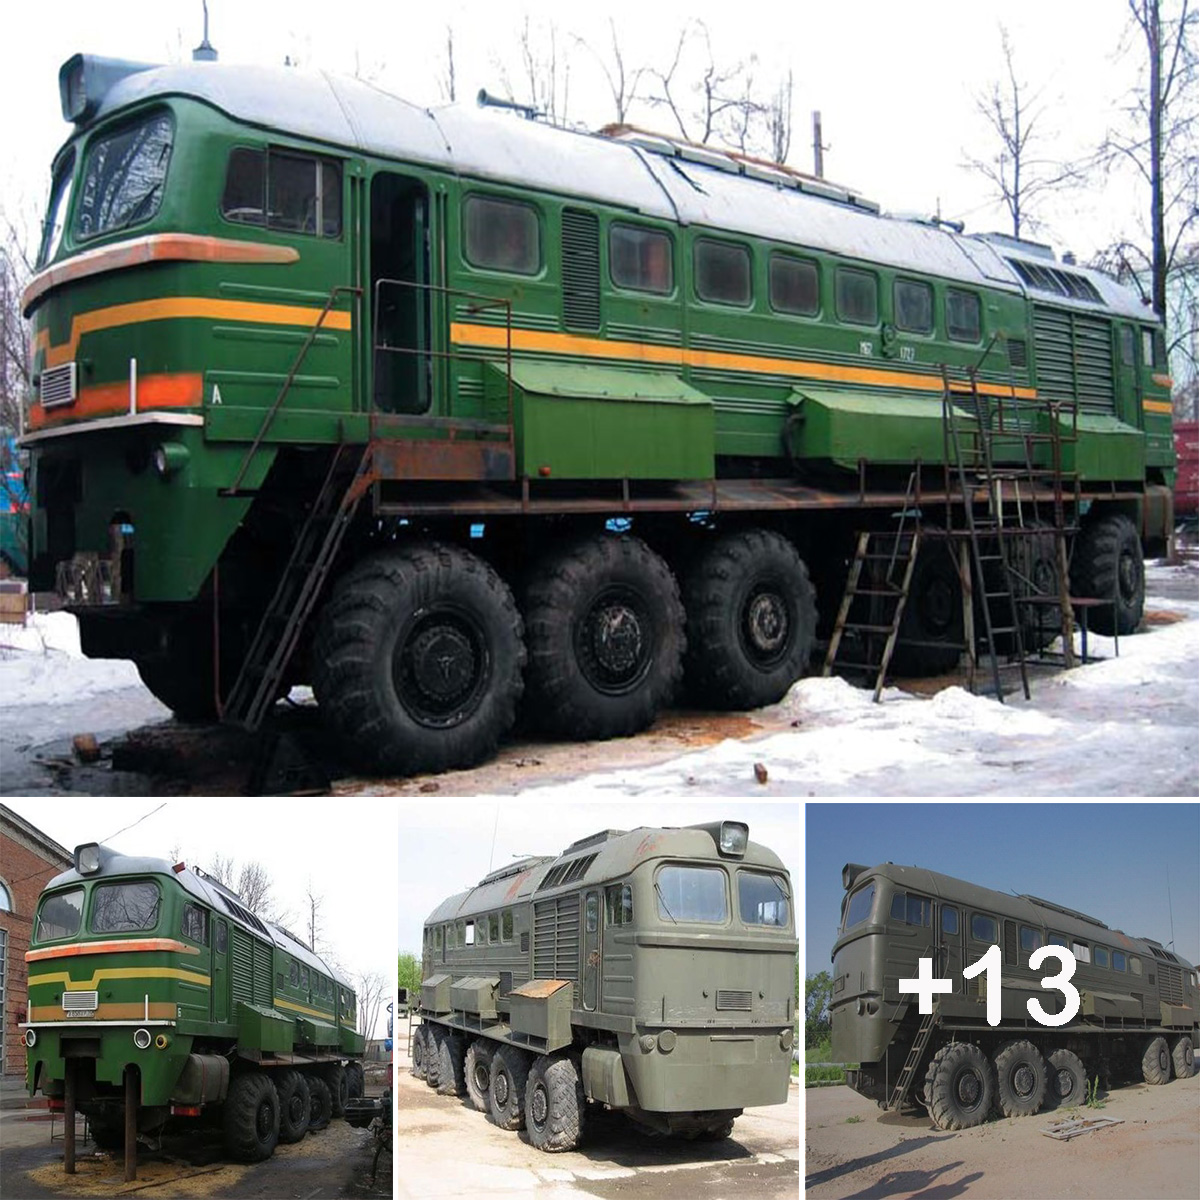 The most amazing train on giant wheels. Diesel locomotive on wheels. Diesel locomotive-M62